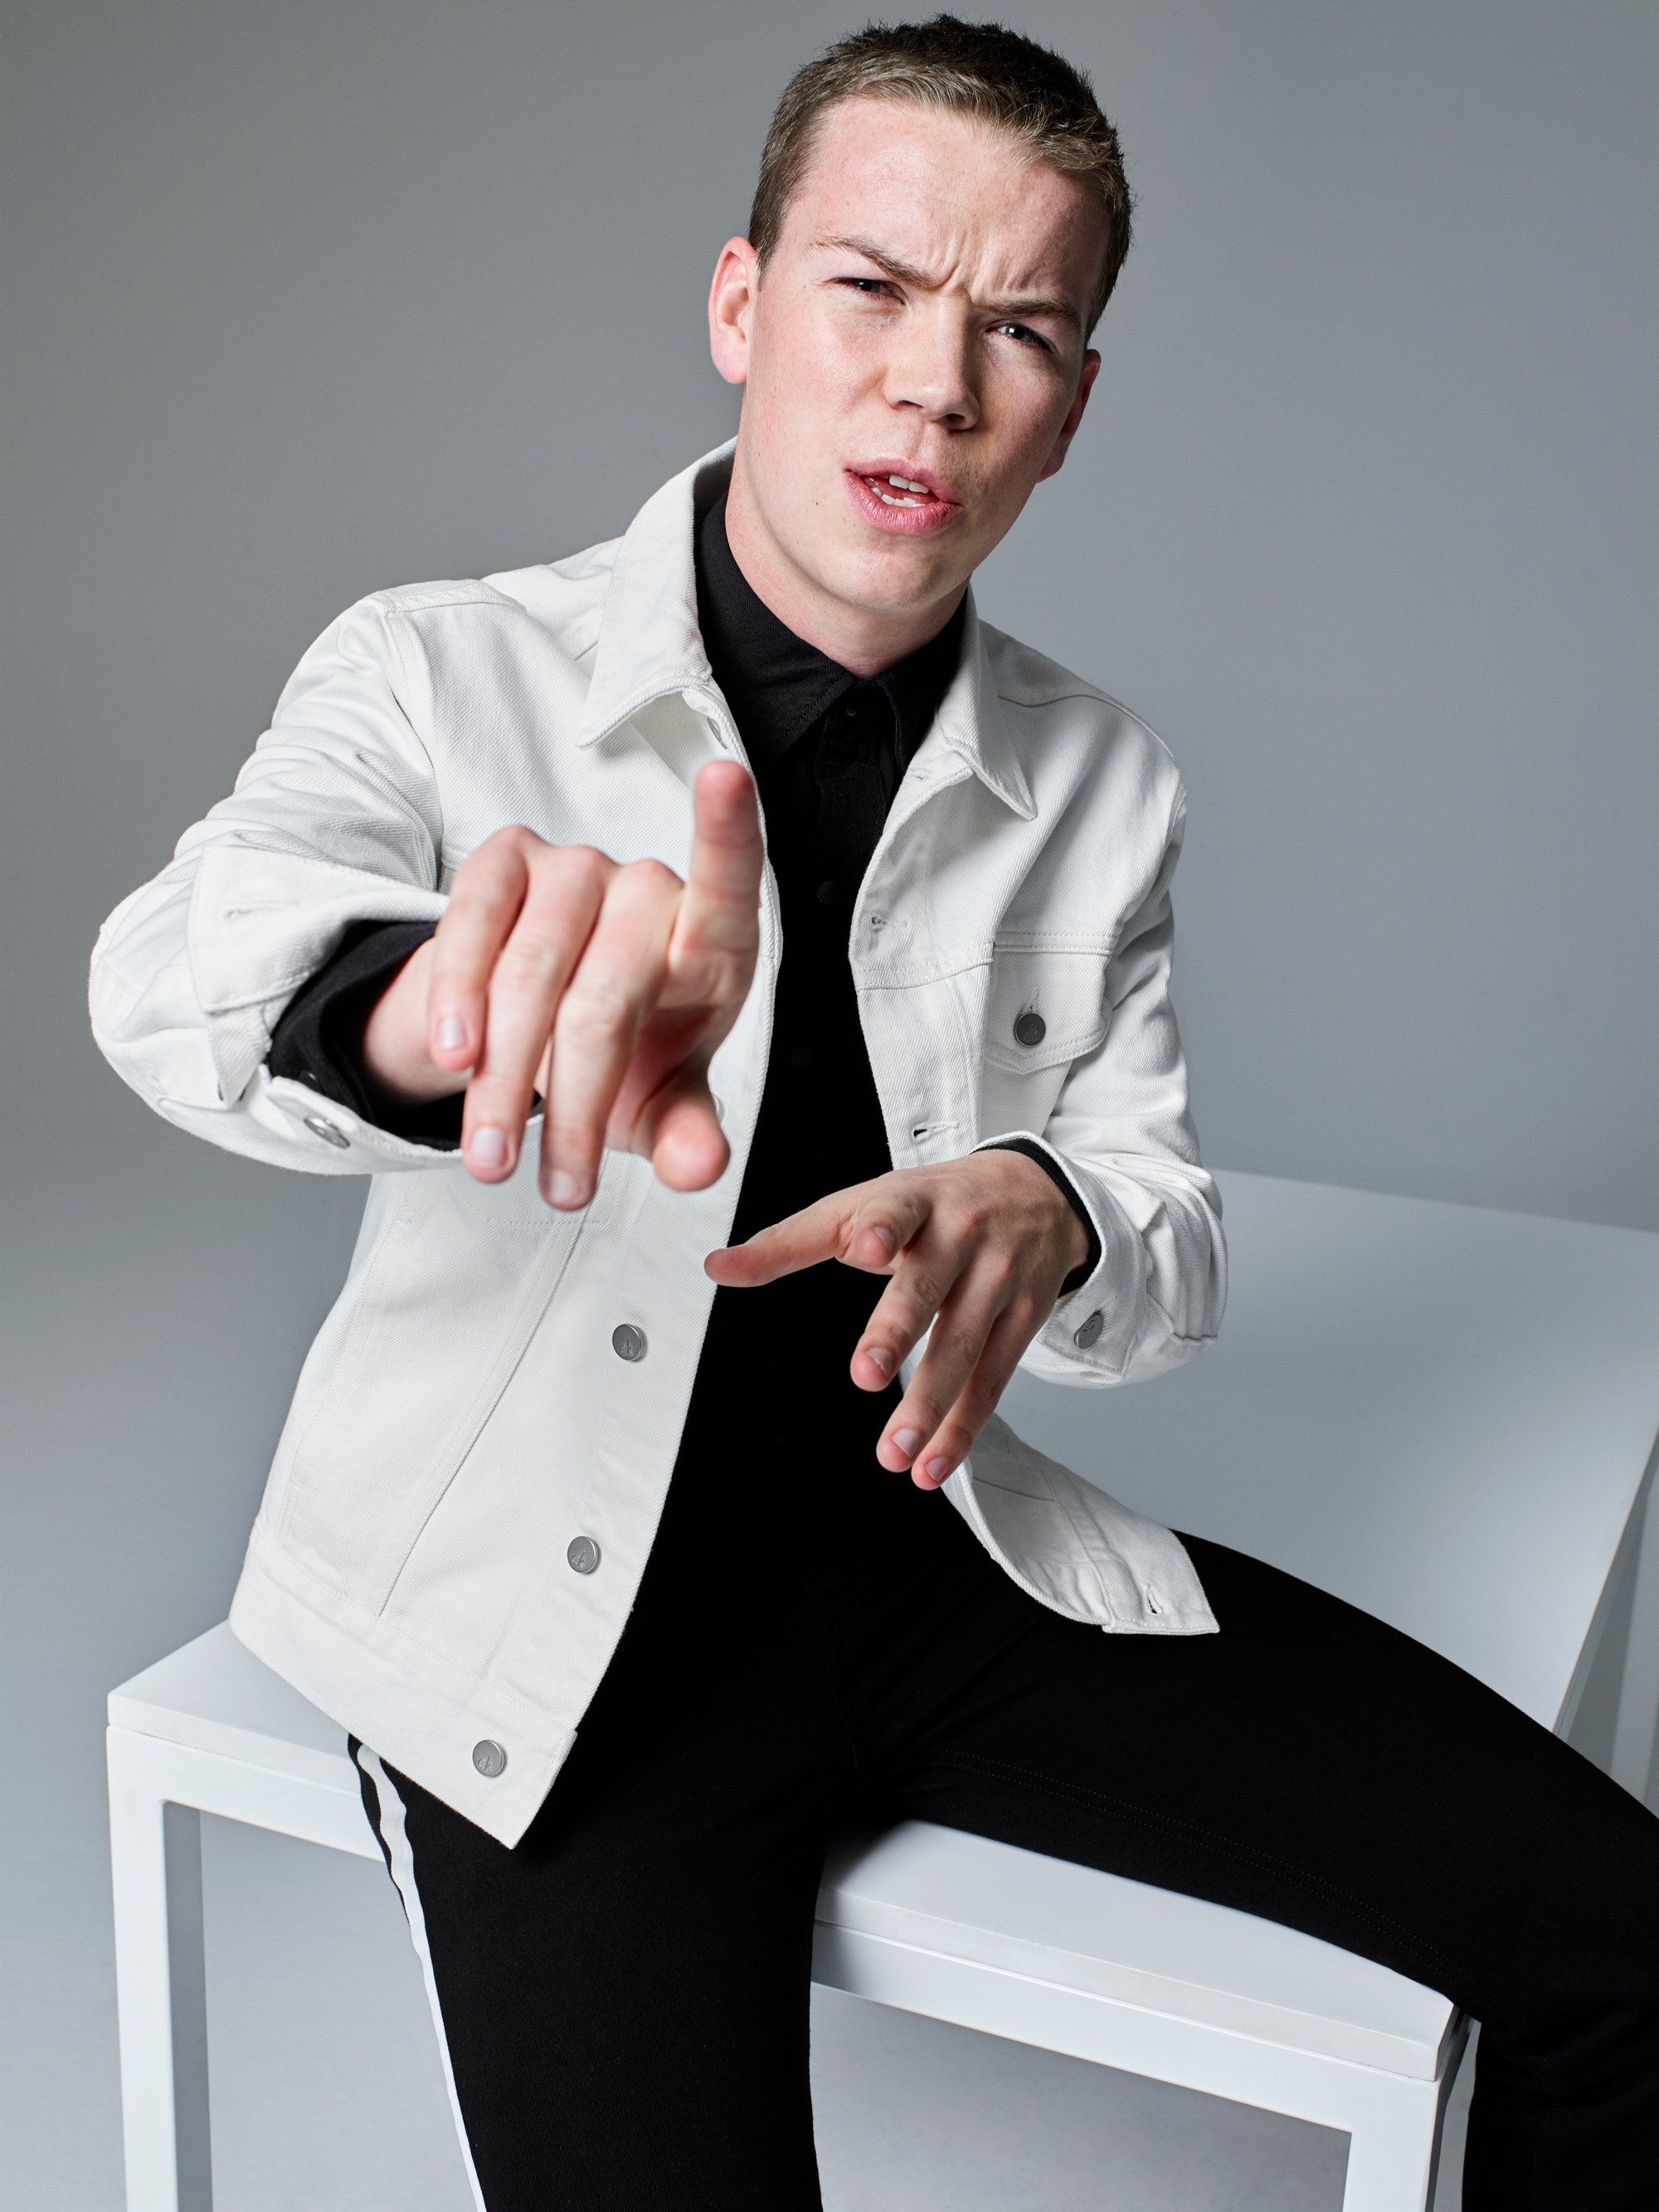 Detroit's Will Poulter Talks Making Out with Jennifer Aniston and Being Miserable with Leonardo DiCaprio